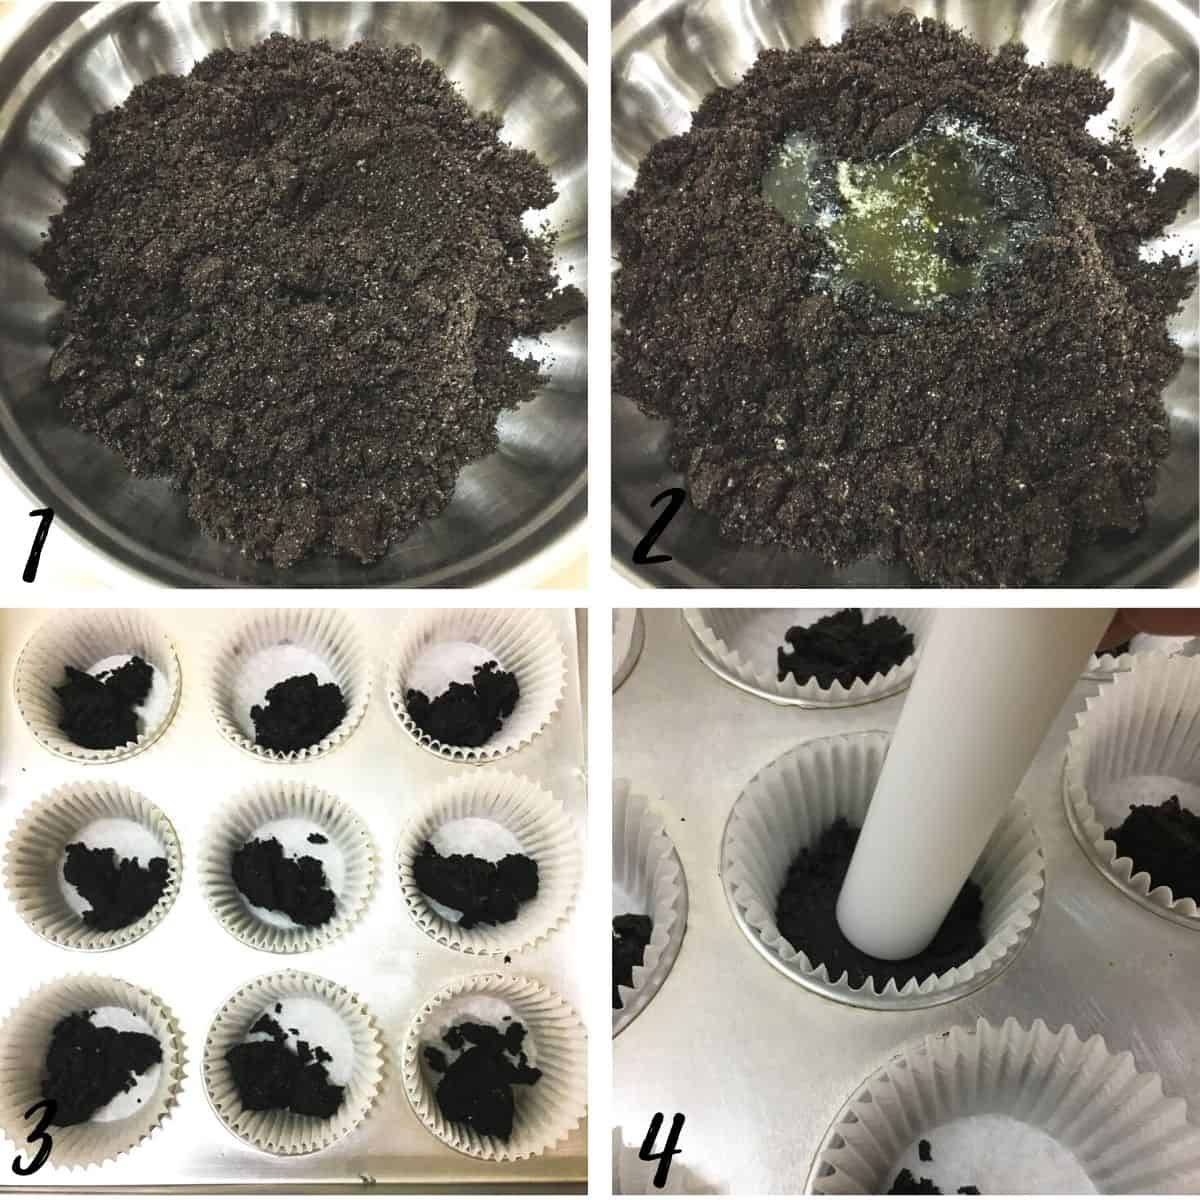 A poster of 4 images showing how to make Oreo crust in cupcake casings.